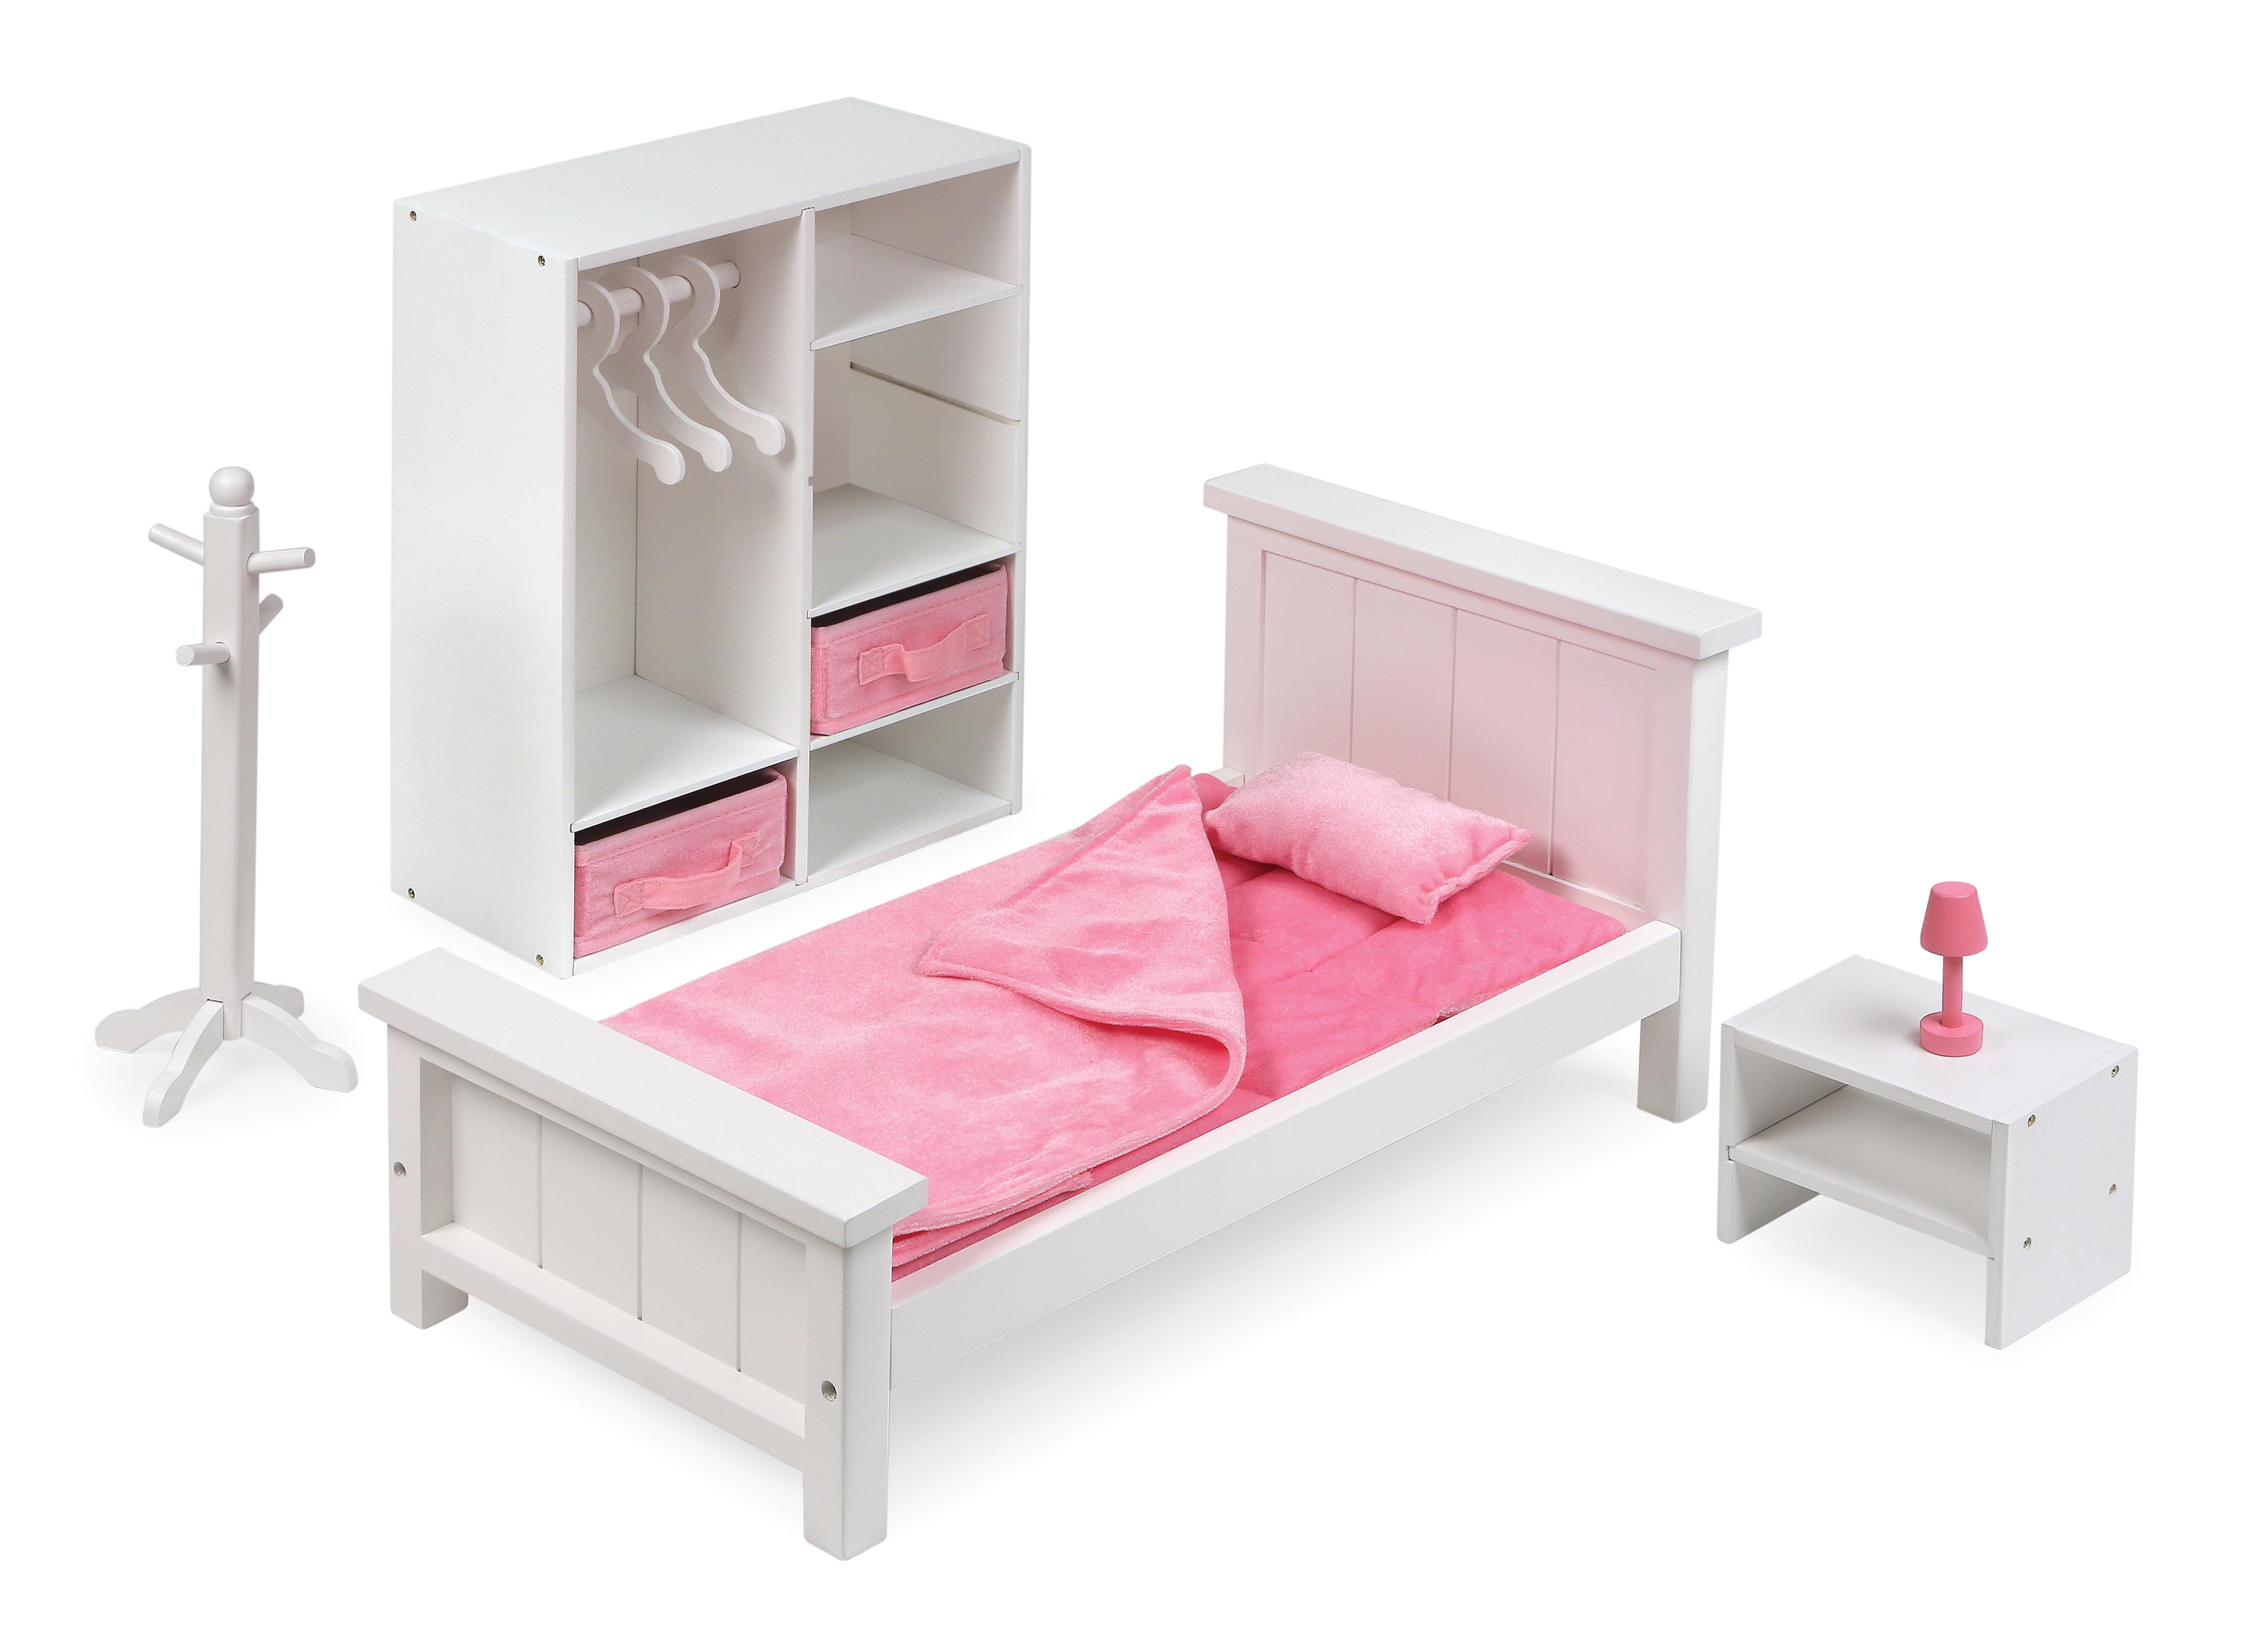 Badger Basket Bedroom Furniture Set for 18 inch Dolls - White/Pink - Fits  American Girl, My Life As & Most 18